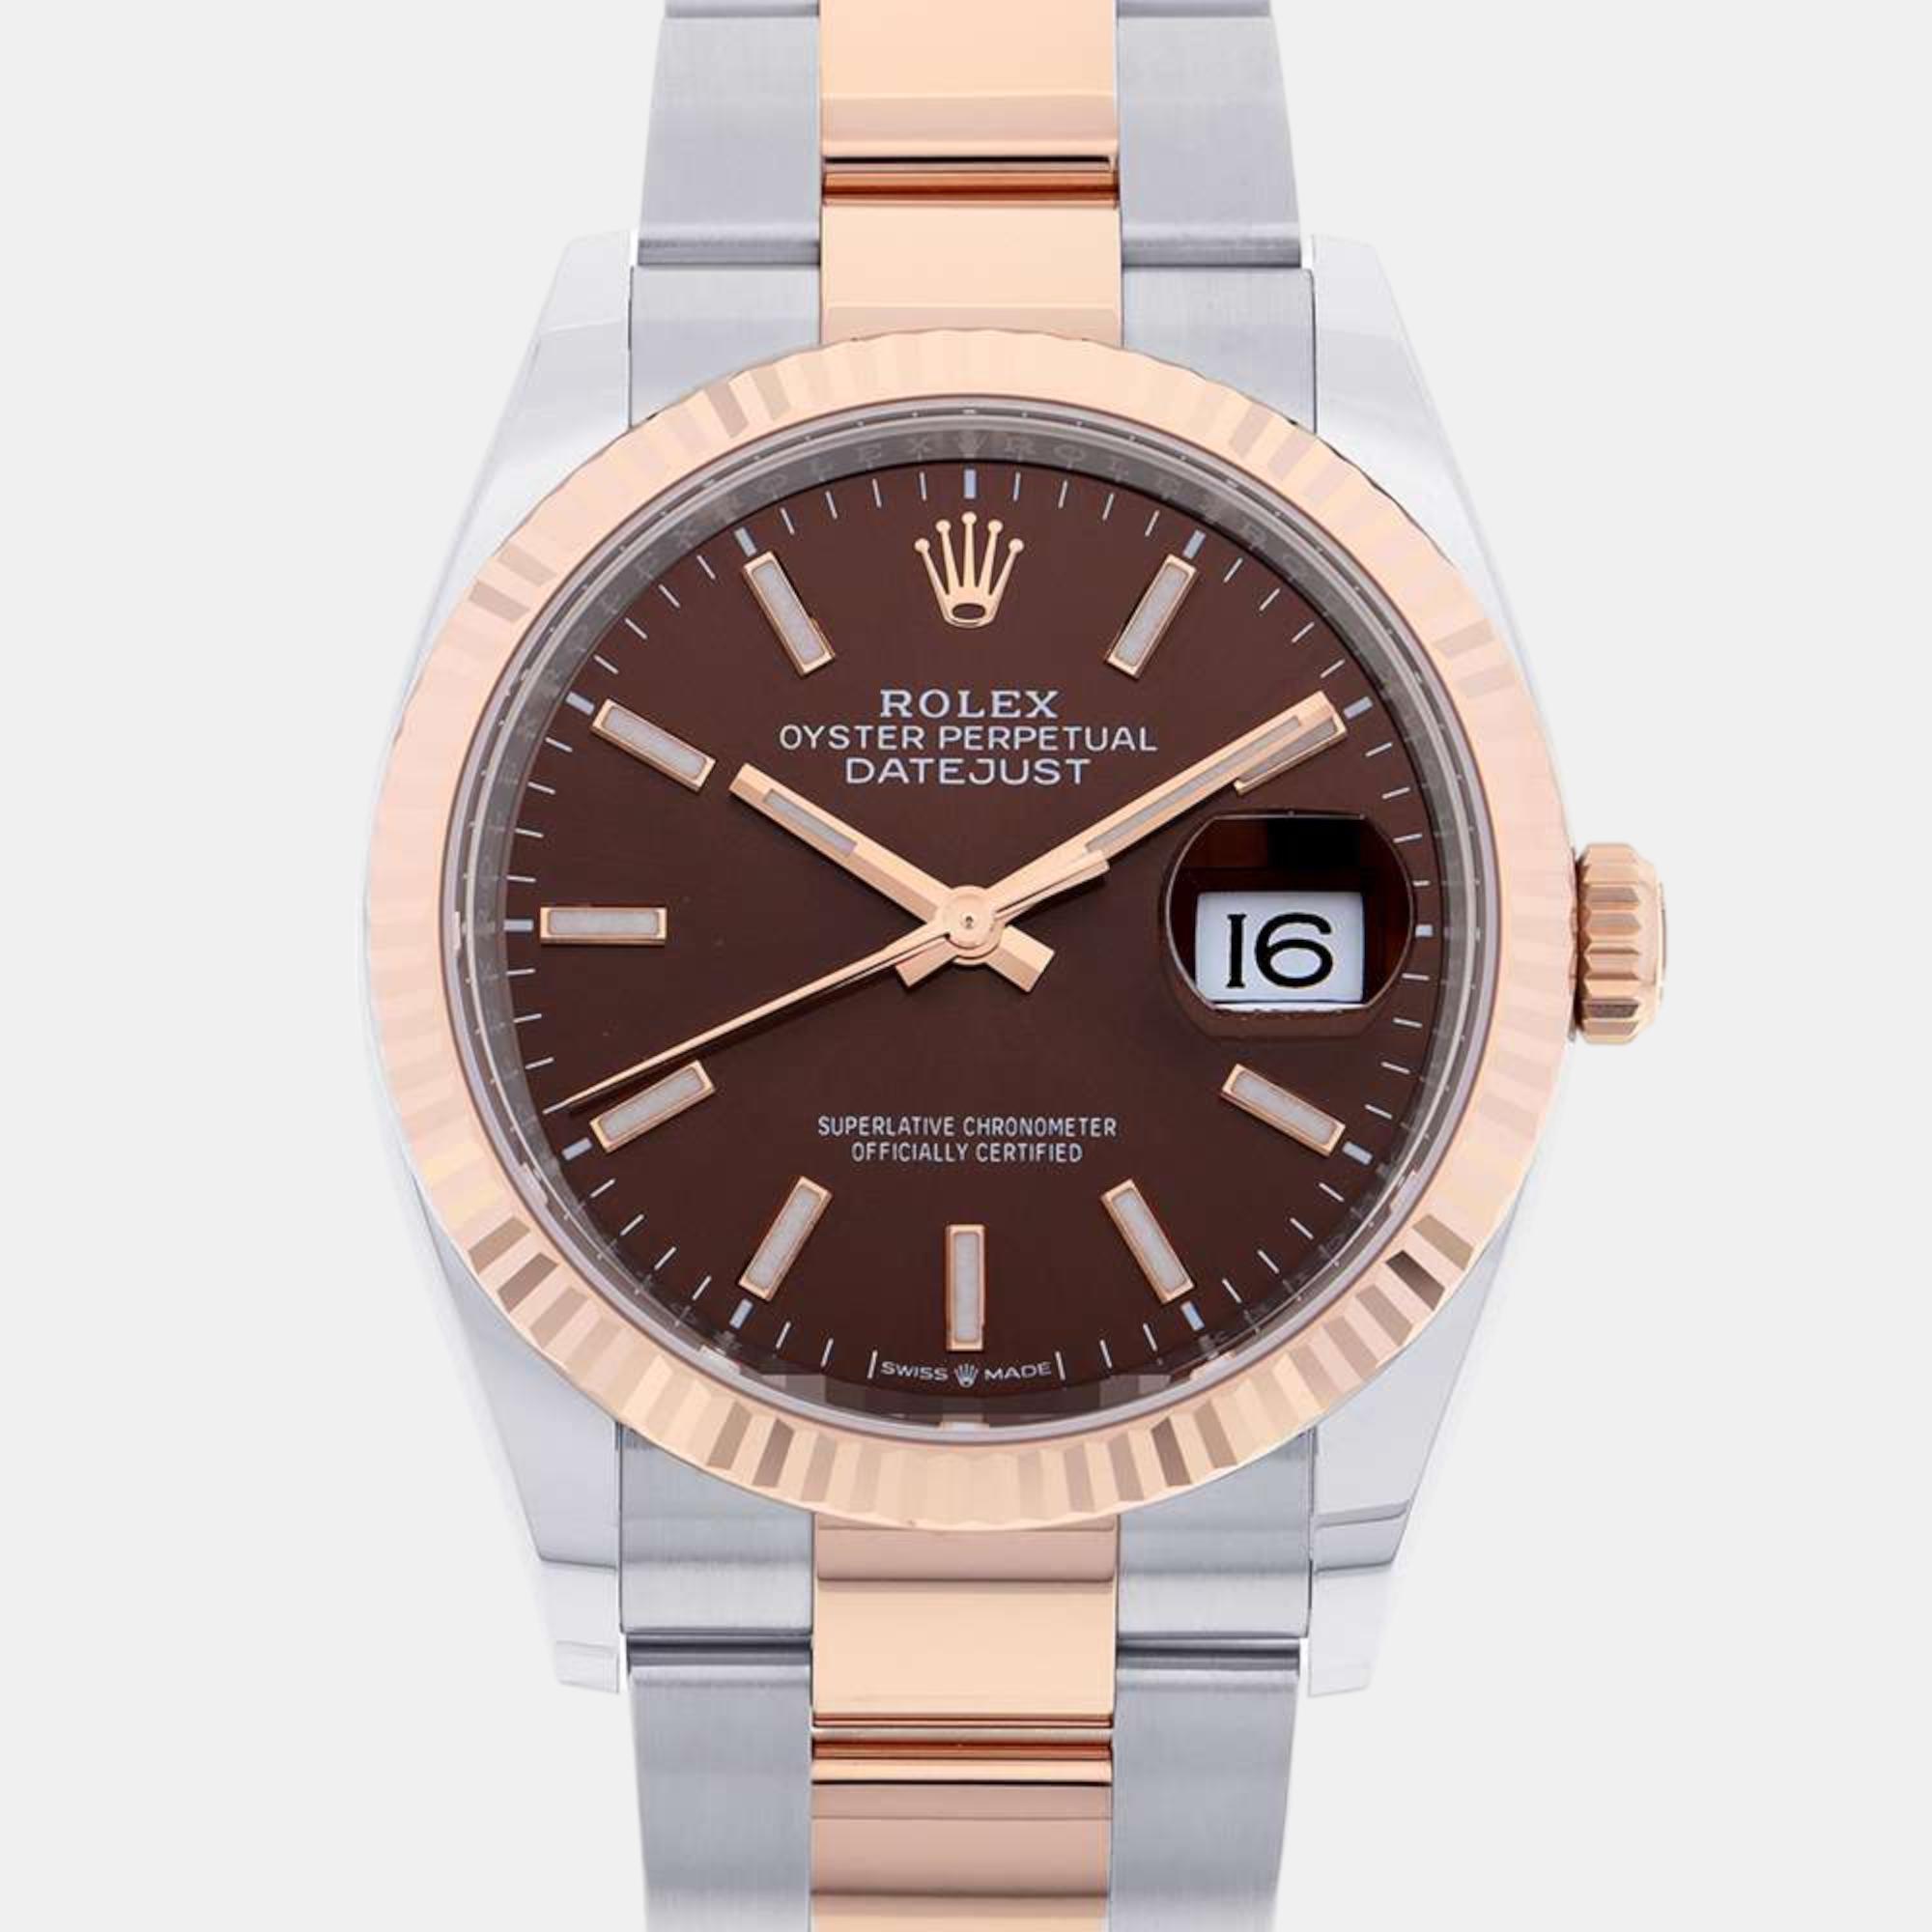 A meticulously crafted watch holds the promise of enduring appeal all day comfort and investment value. Carefully assembled and finished to stand out on your wrist this designer timepiece is a purchase you will cherish.